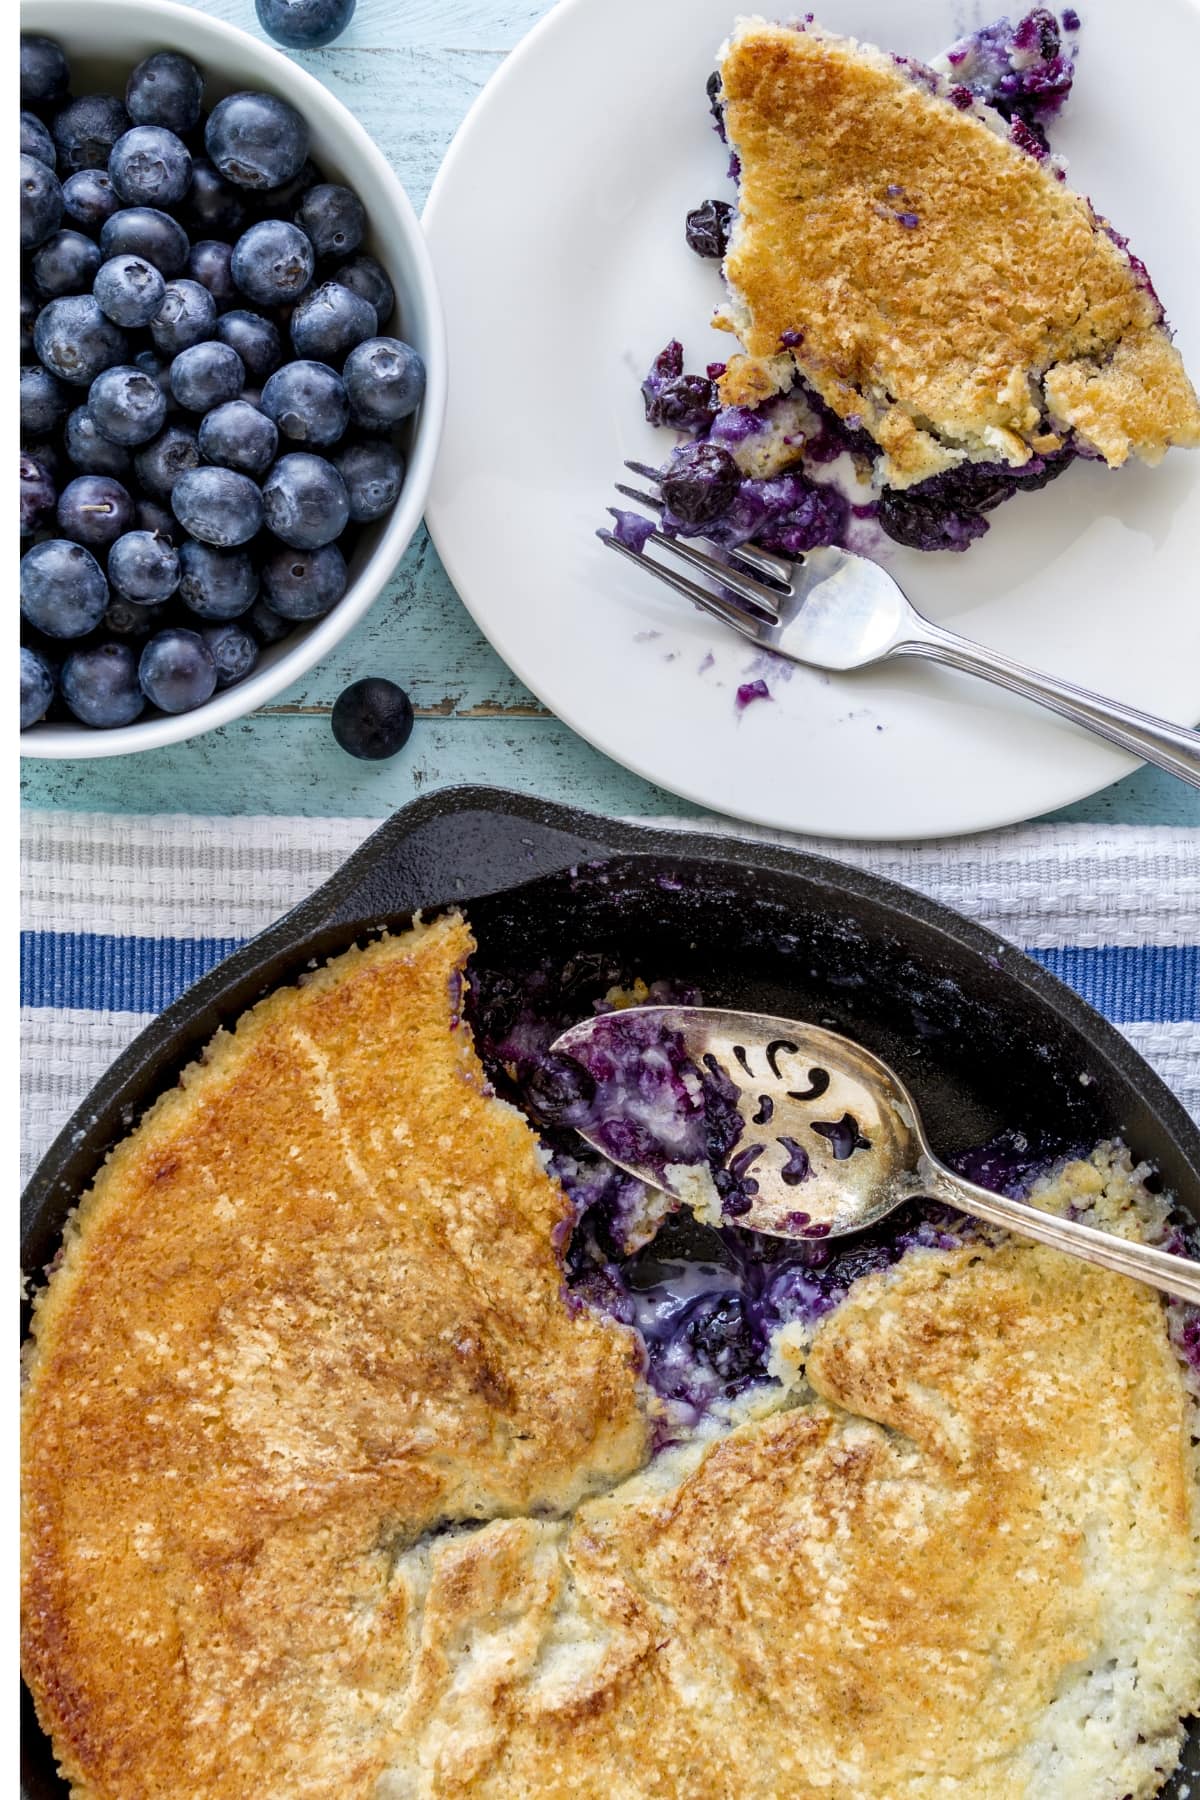 Cobbler vs. Pie (What's the Difference?) featuring Blueberry Cobbler in a Cast Iron Pan and A Slice on a Small White Plate with a Fork and A Side of Fresh Blueberries in a Bowl